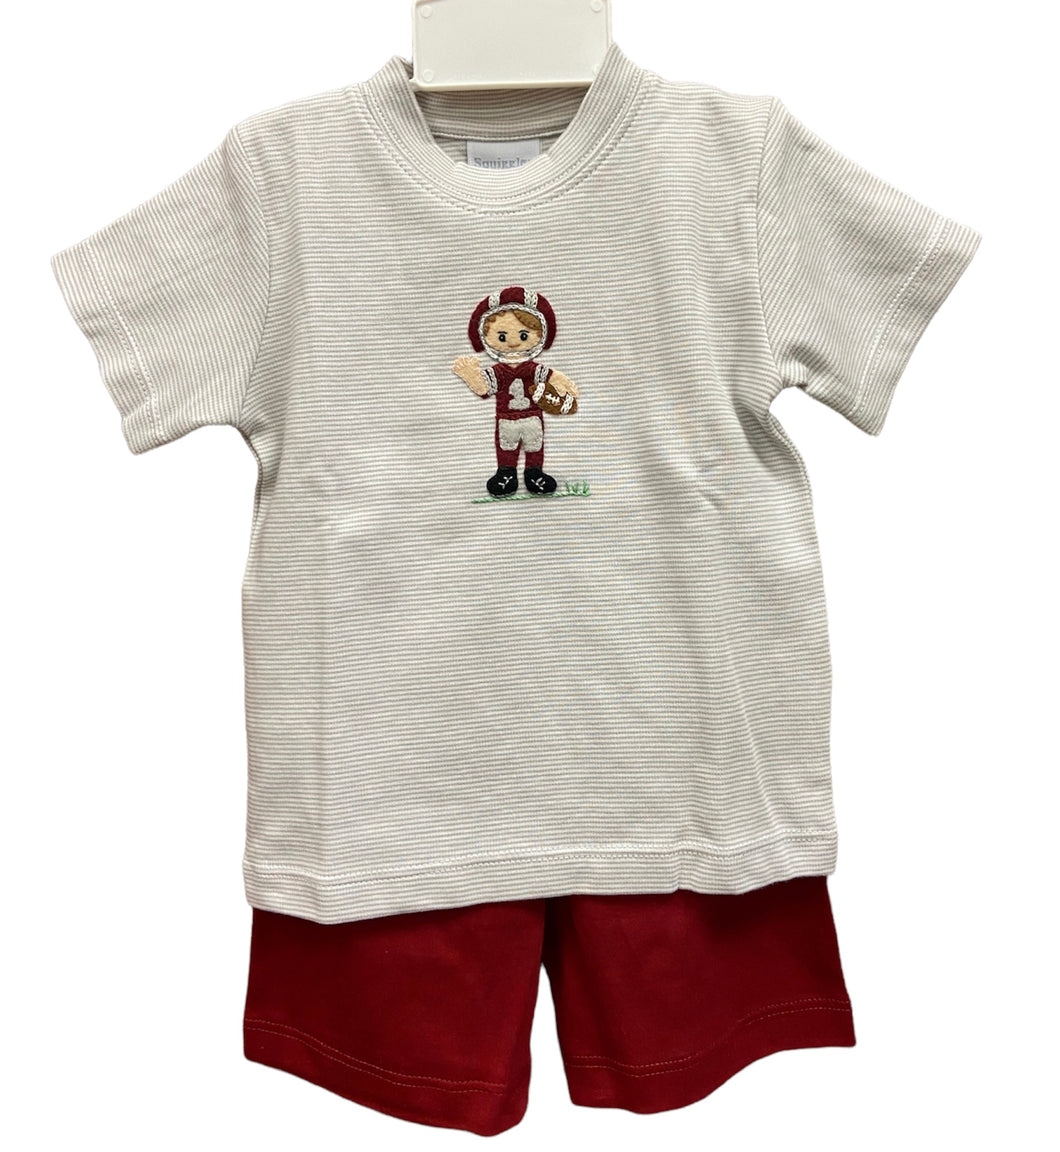 Maroon Football Player Short Set by Squiggles